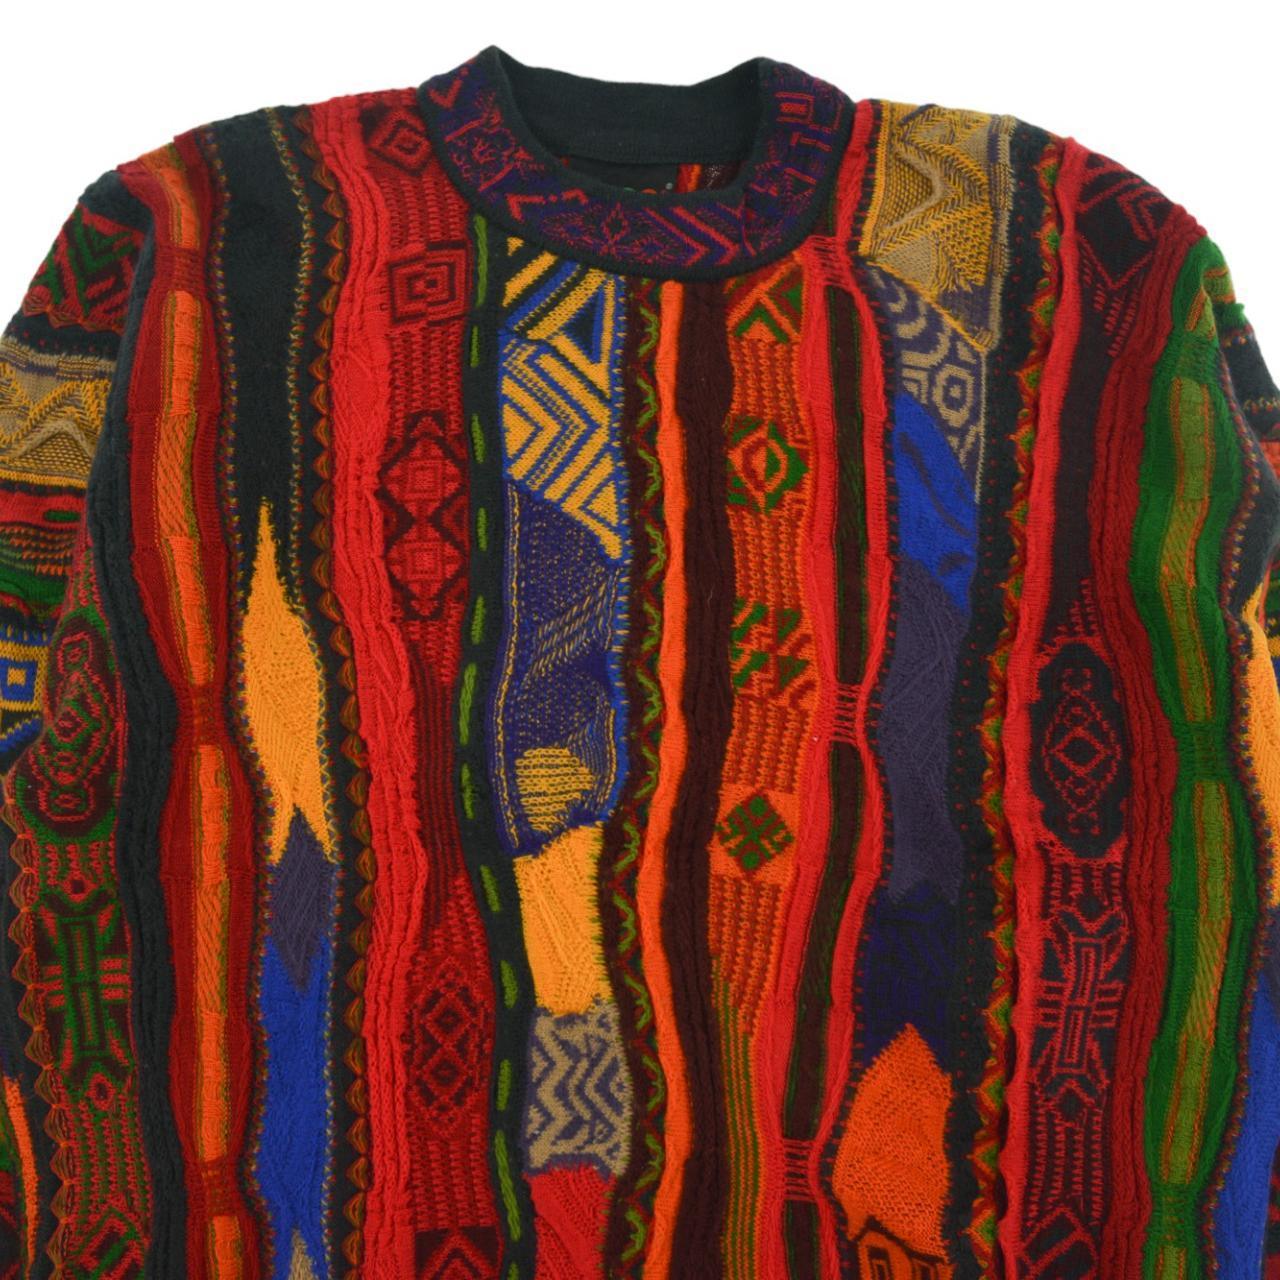 Vintage Coogi Knit Jumpers Size M - Known Source